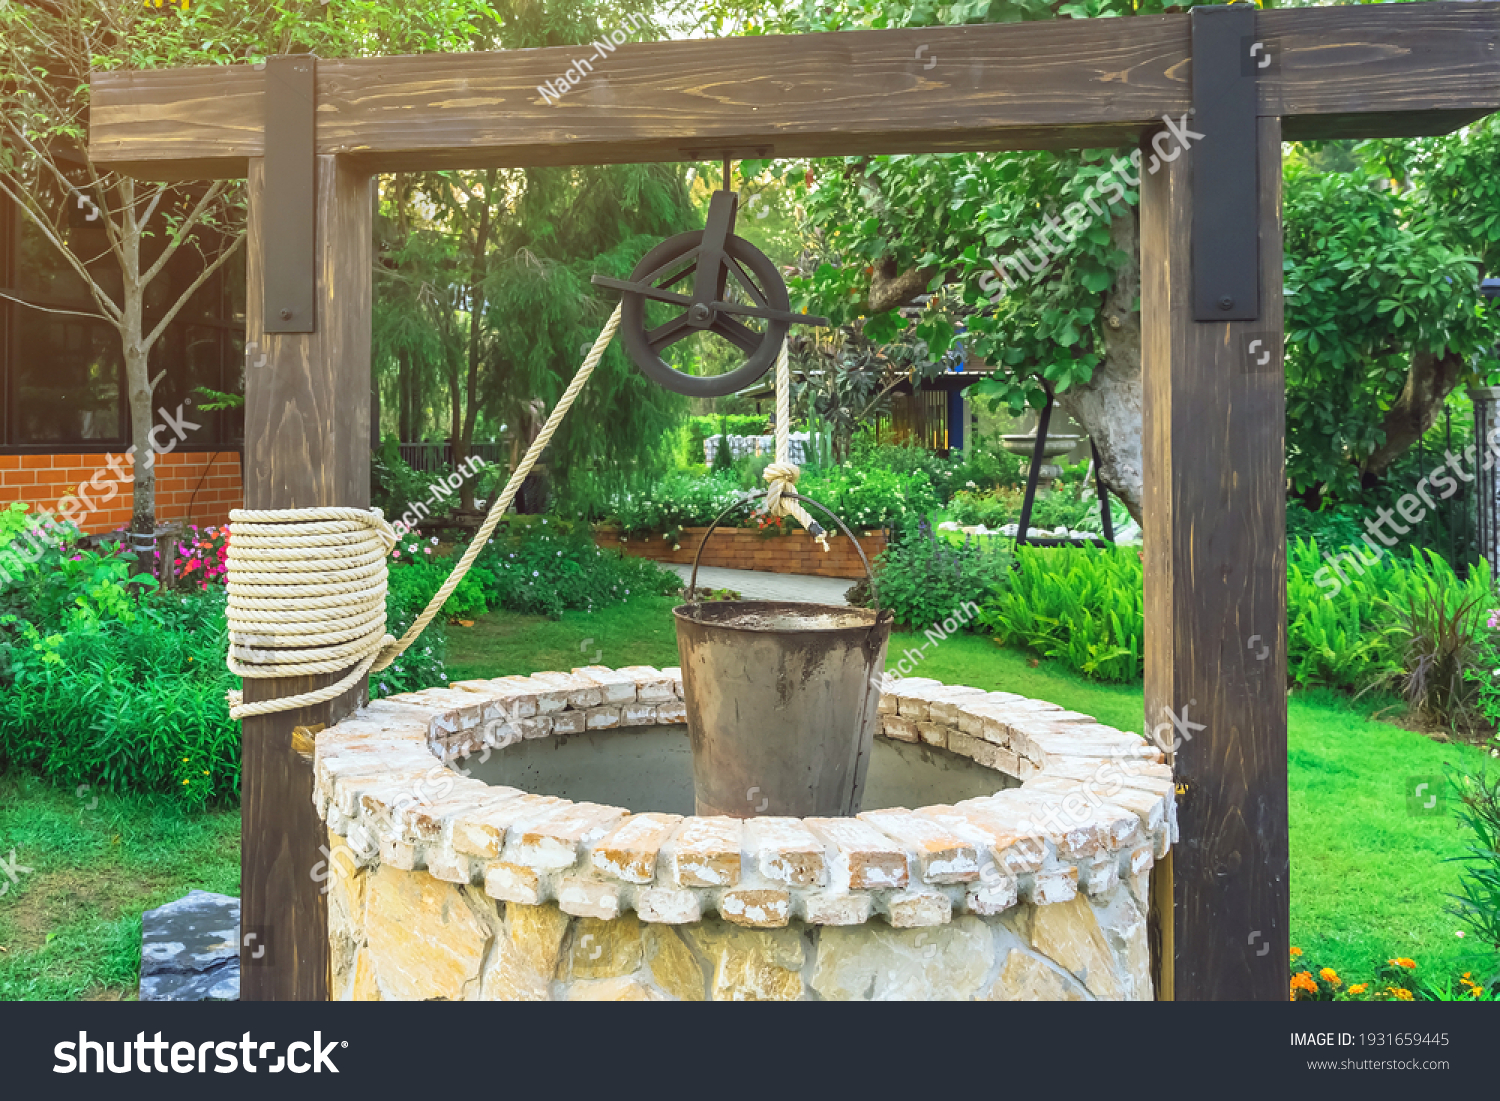 Beautiful artesian well made by stones and wheel pulley with metal bucket and rope in peaceful garden atmosphere. Retro stone water well in rural area. Garden decoration with antique items. #1931659445